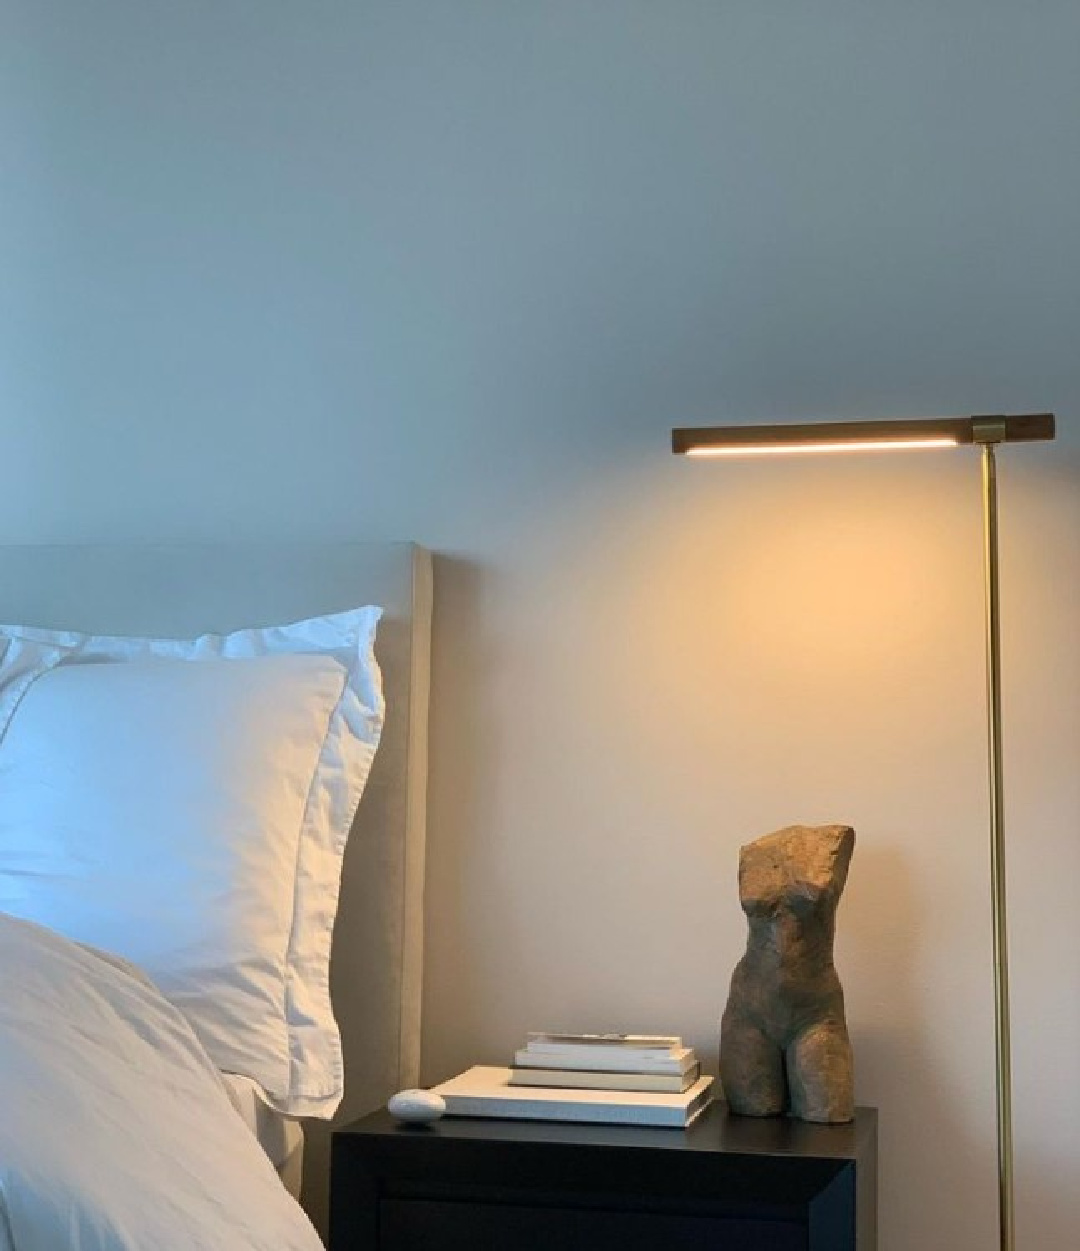 Balboa Mist paint color in a bedroom - @glimanthbow. #balboamist #serenepaintcolors